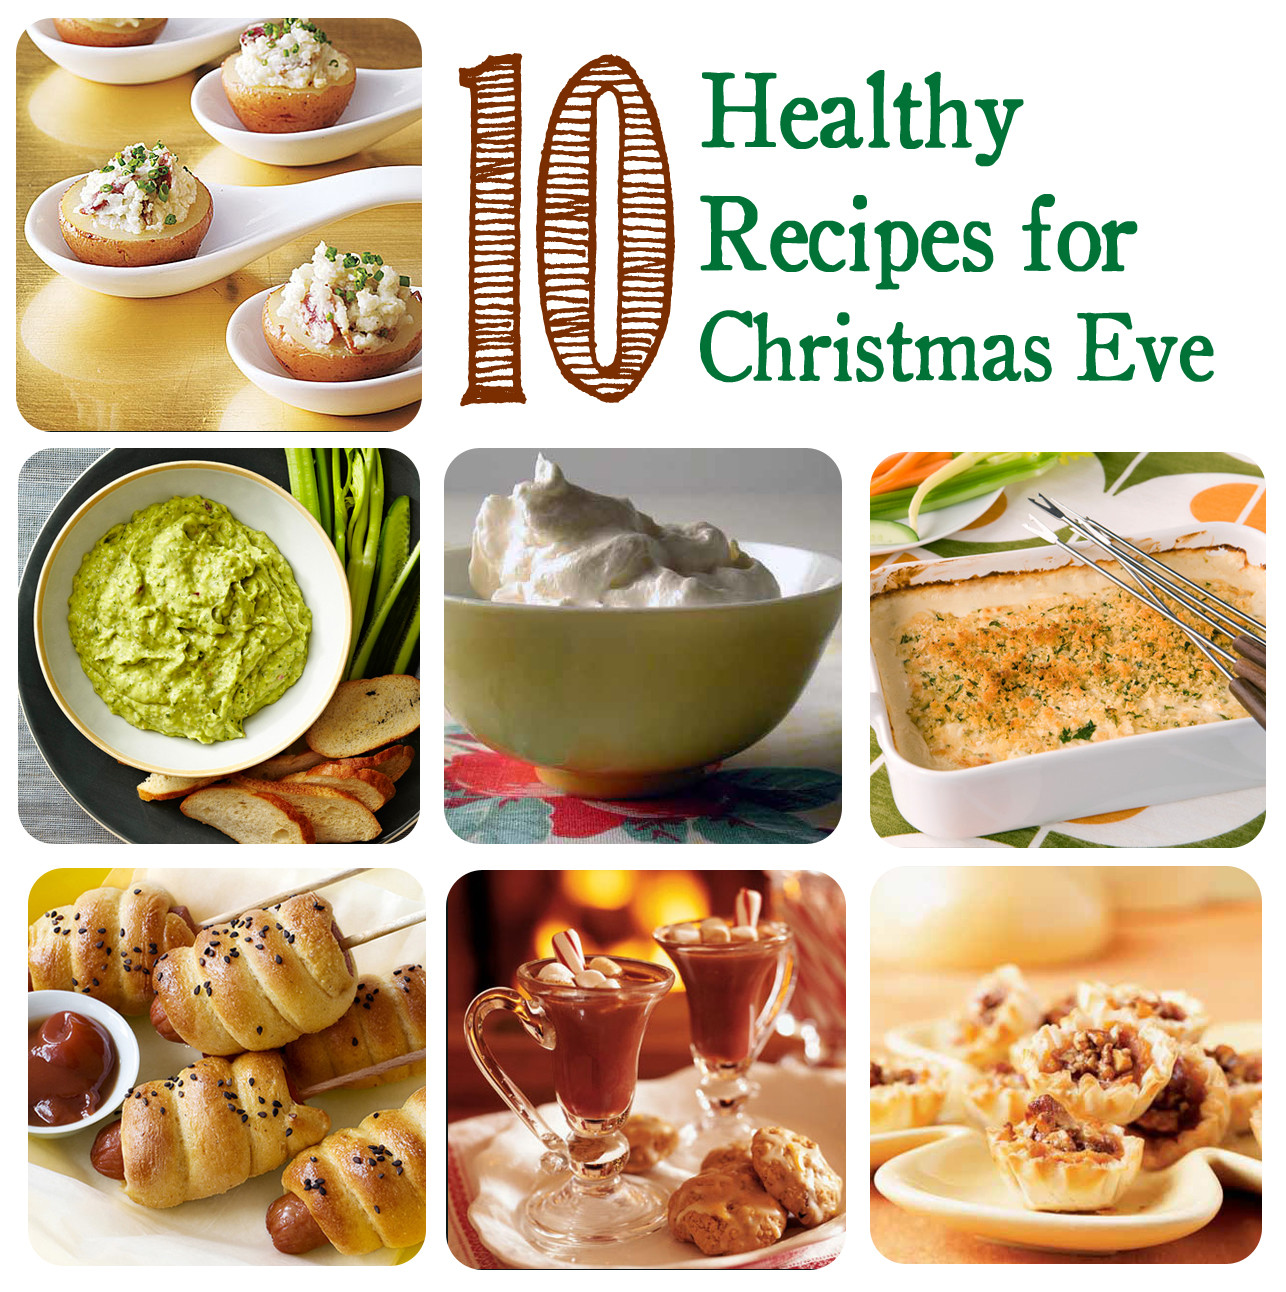 Healthy Christmas Appetizers
 My Inspired Home Christmas Eve Healthy Appetizers